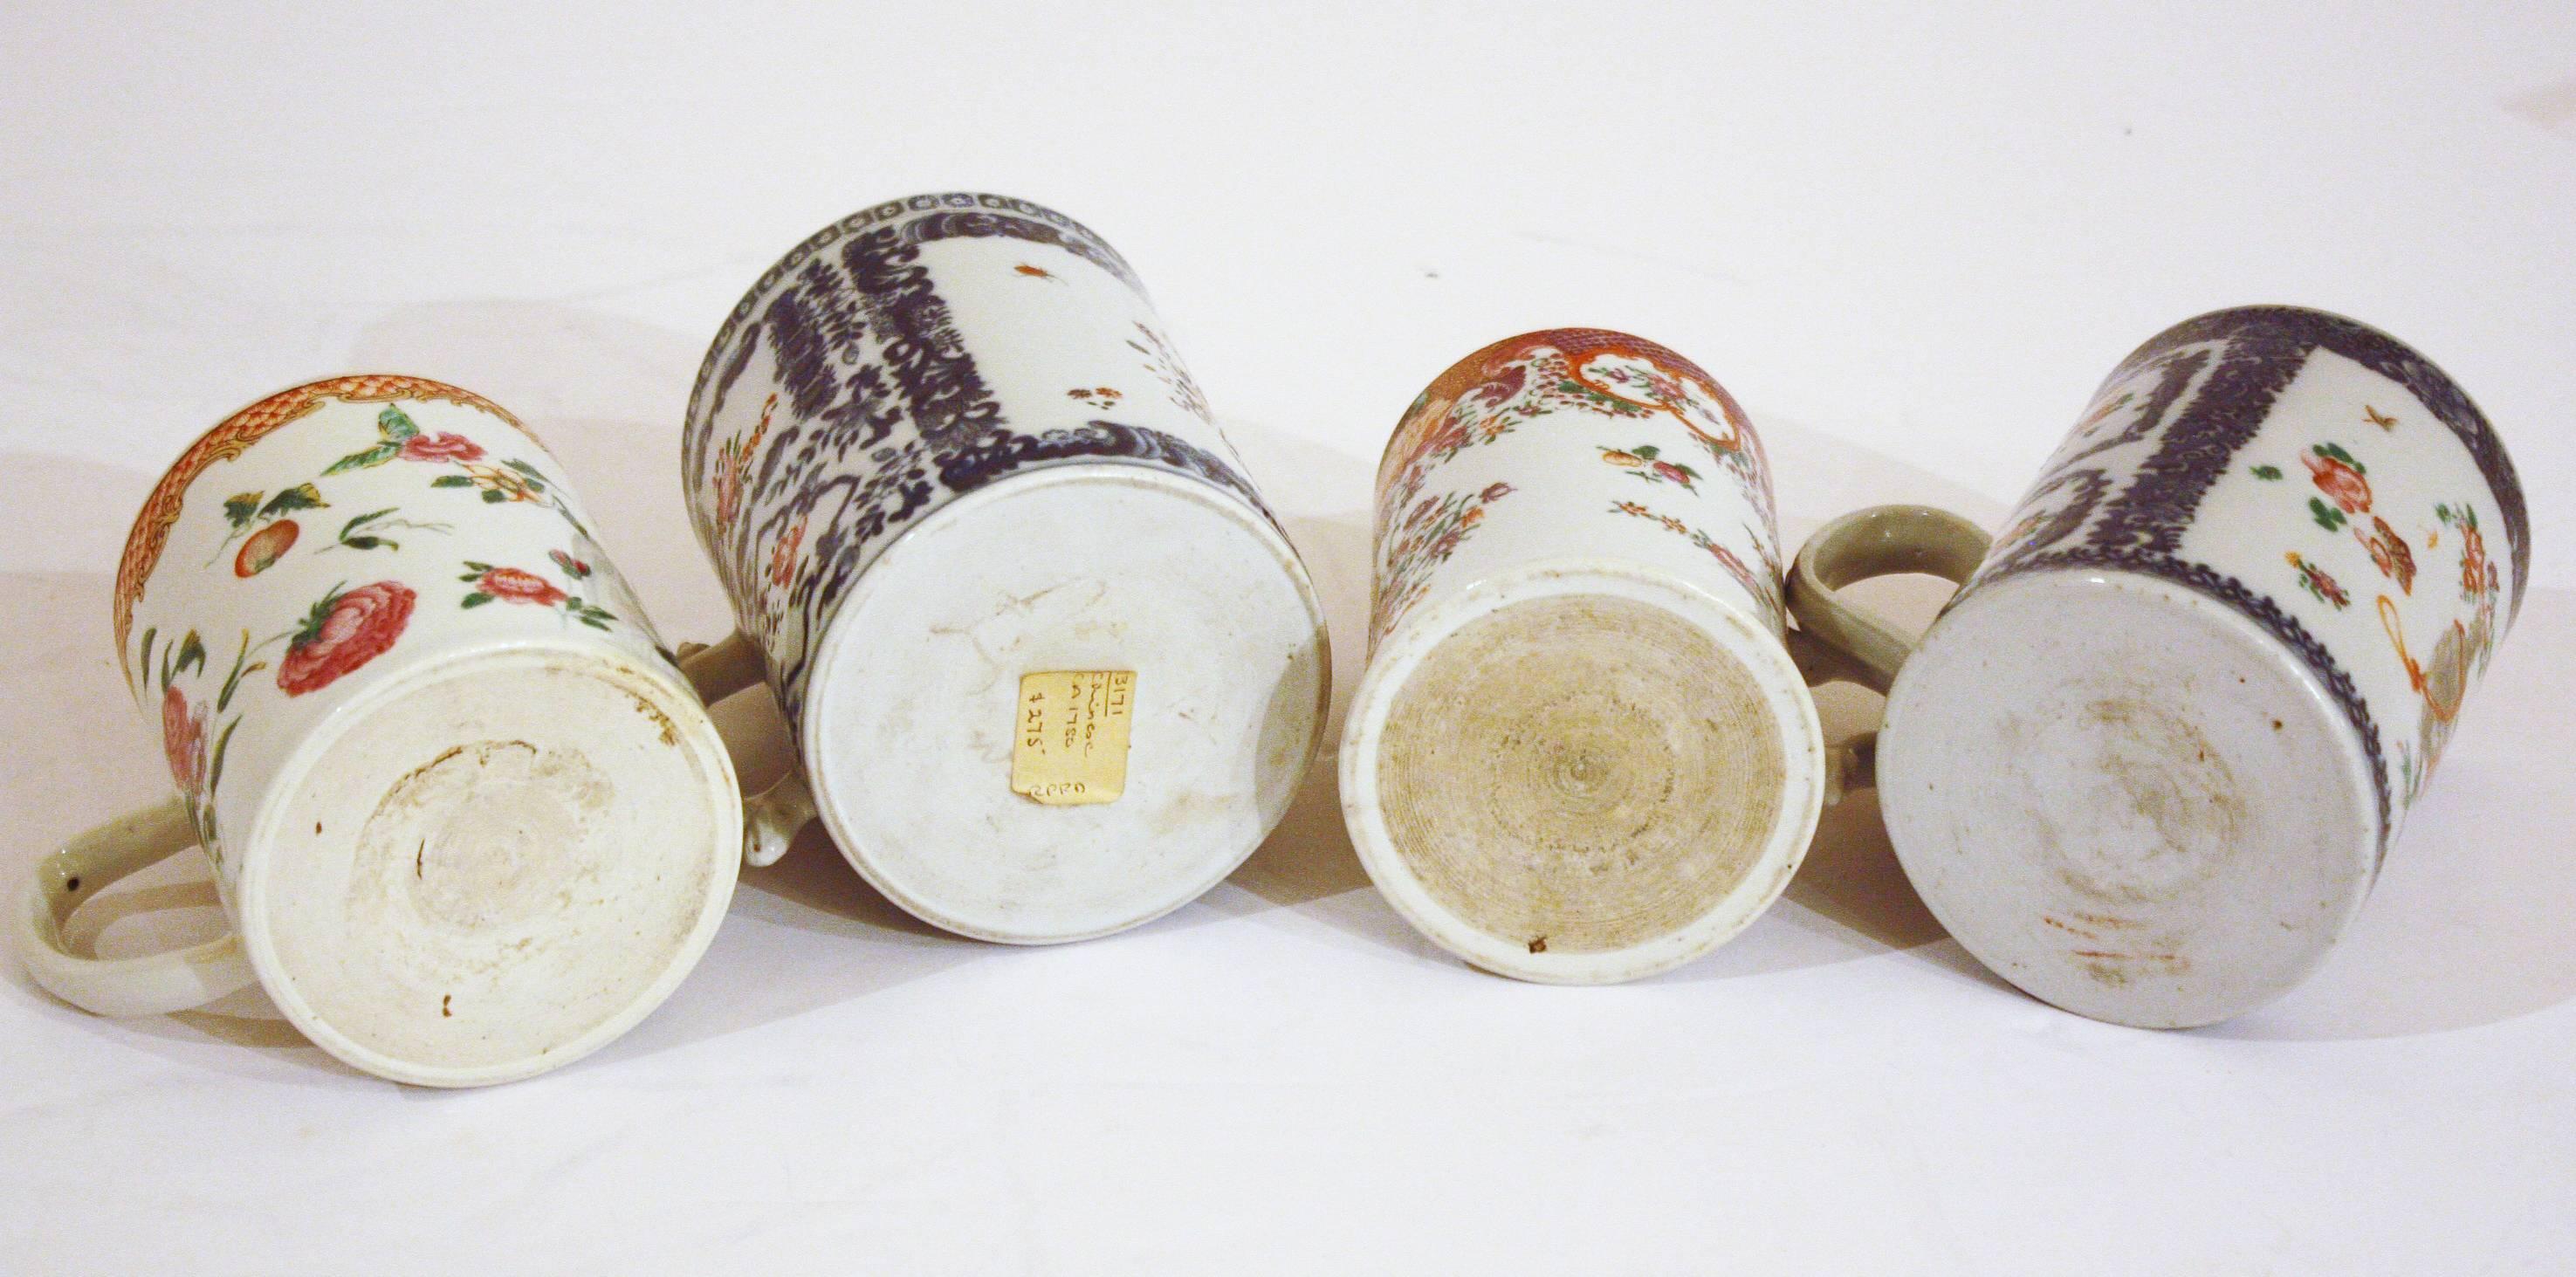 18th Century Late 18th-Early 19th Century Chinese Export Mugs, Tankards